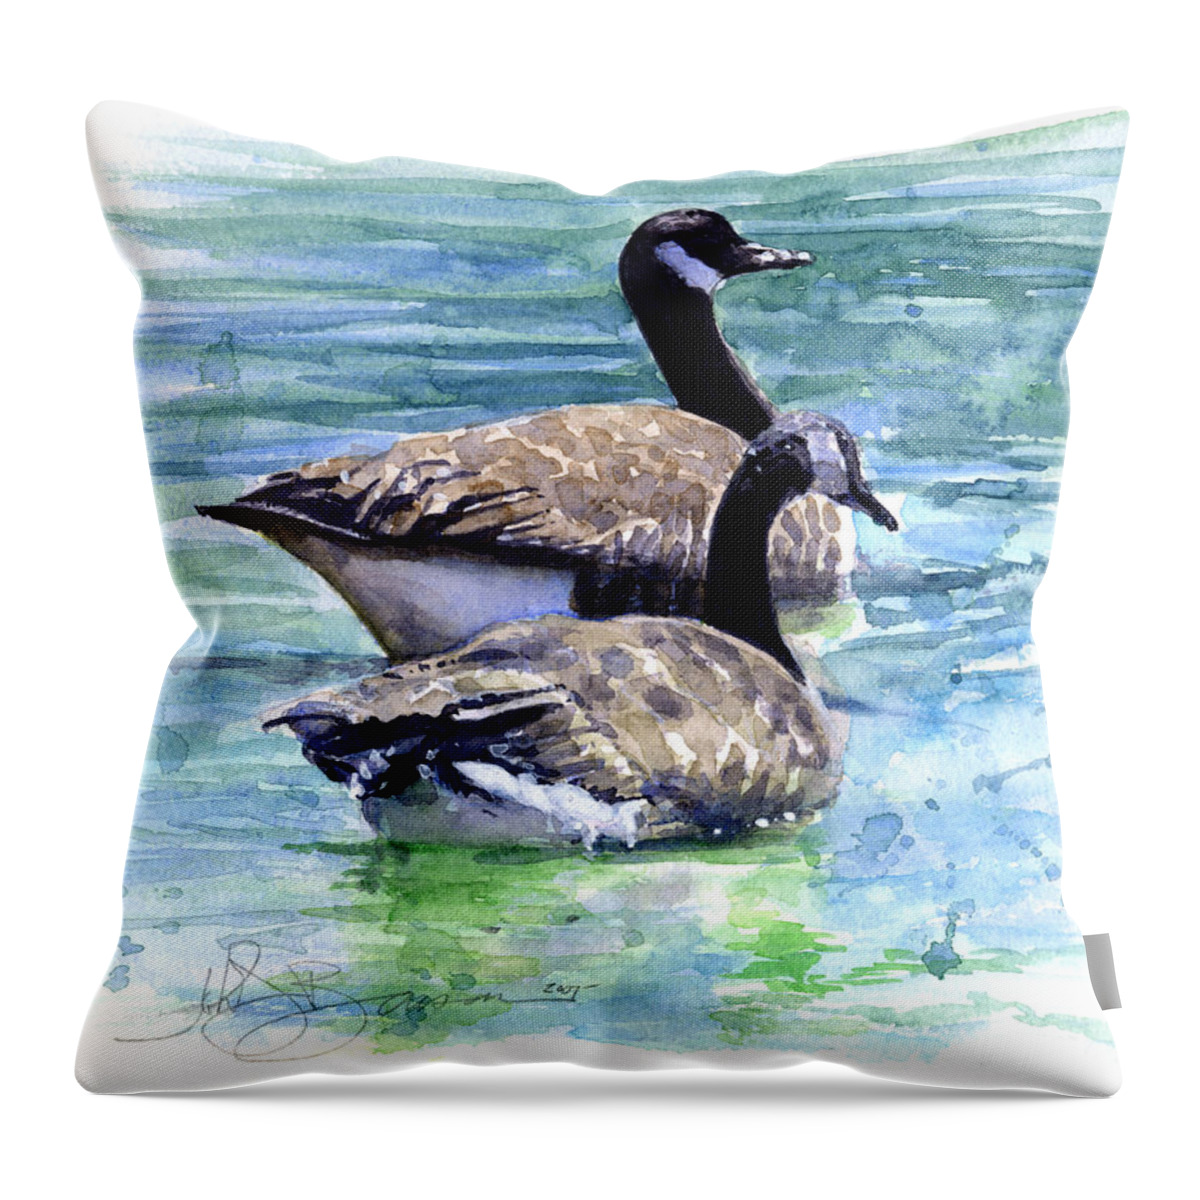 Canada Throw Pillow featuring the painting Canada Geese by John D Benson